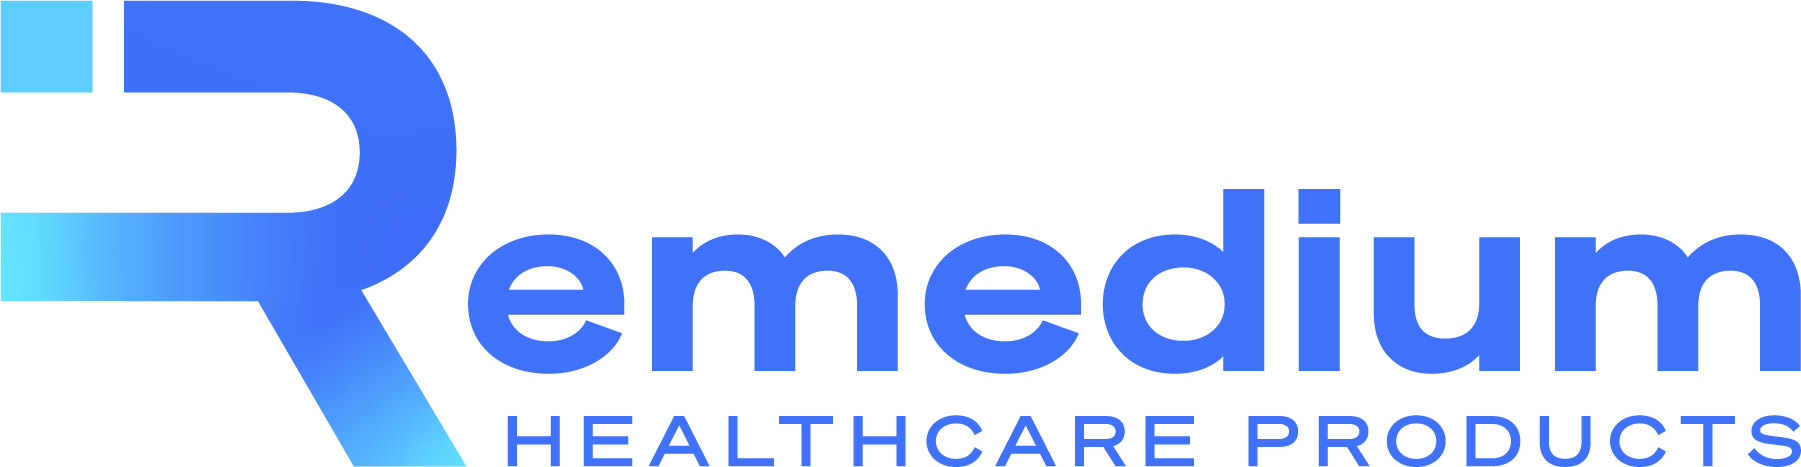 Remedium Healthcare Products